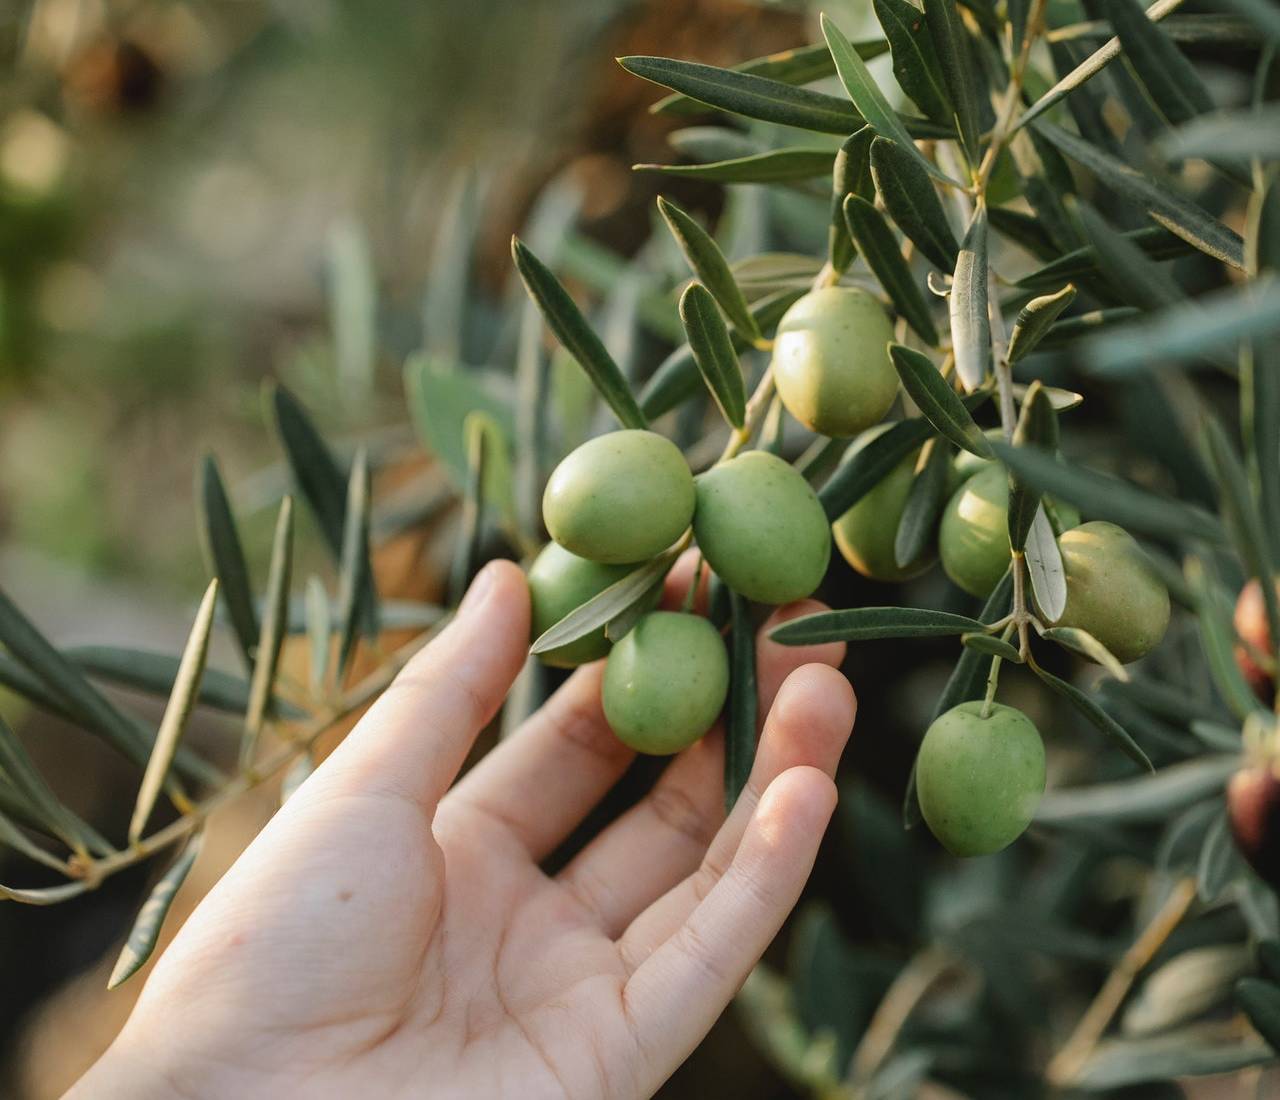 Skin Olive Oil for Skin: The Benefits of Olive Oil Enriched Skin Care Products for Dermatitis, Eczema and Dry Skin